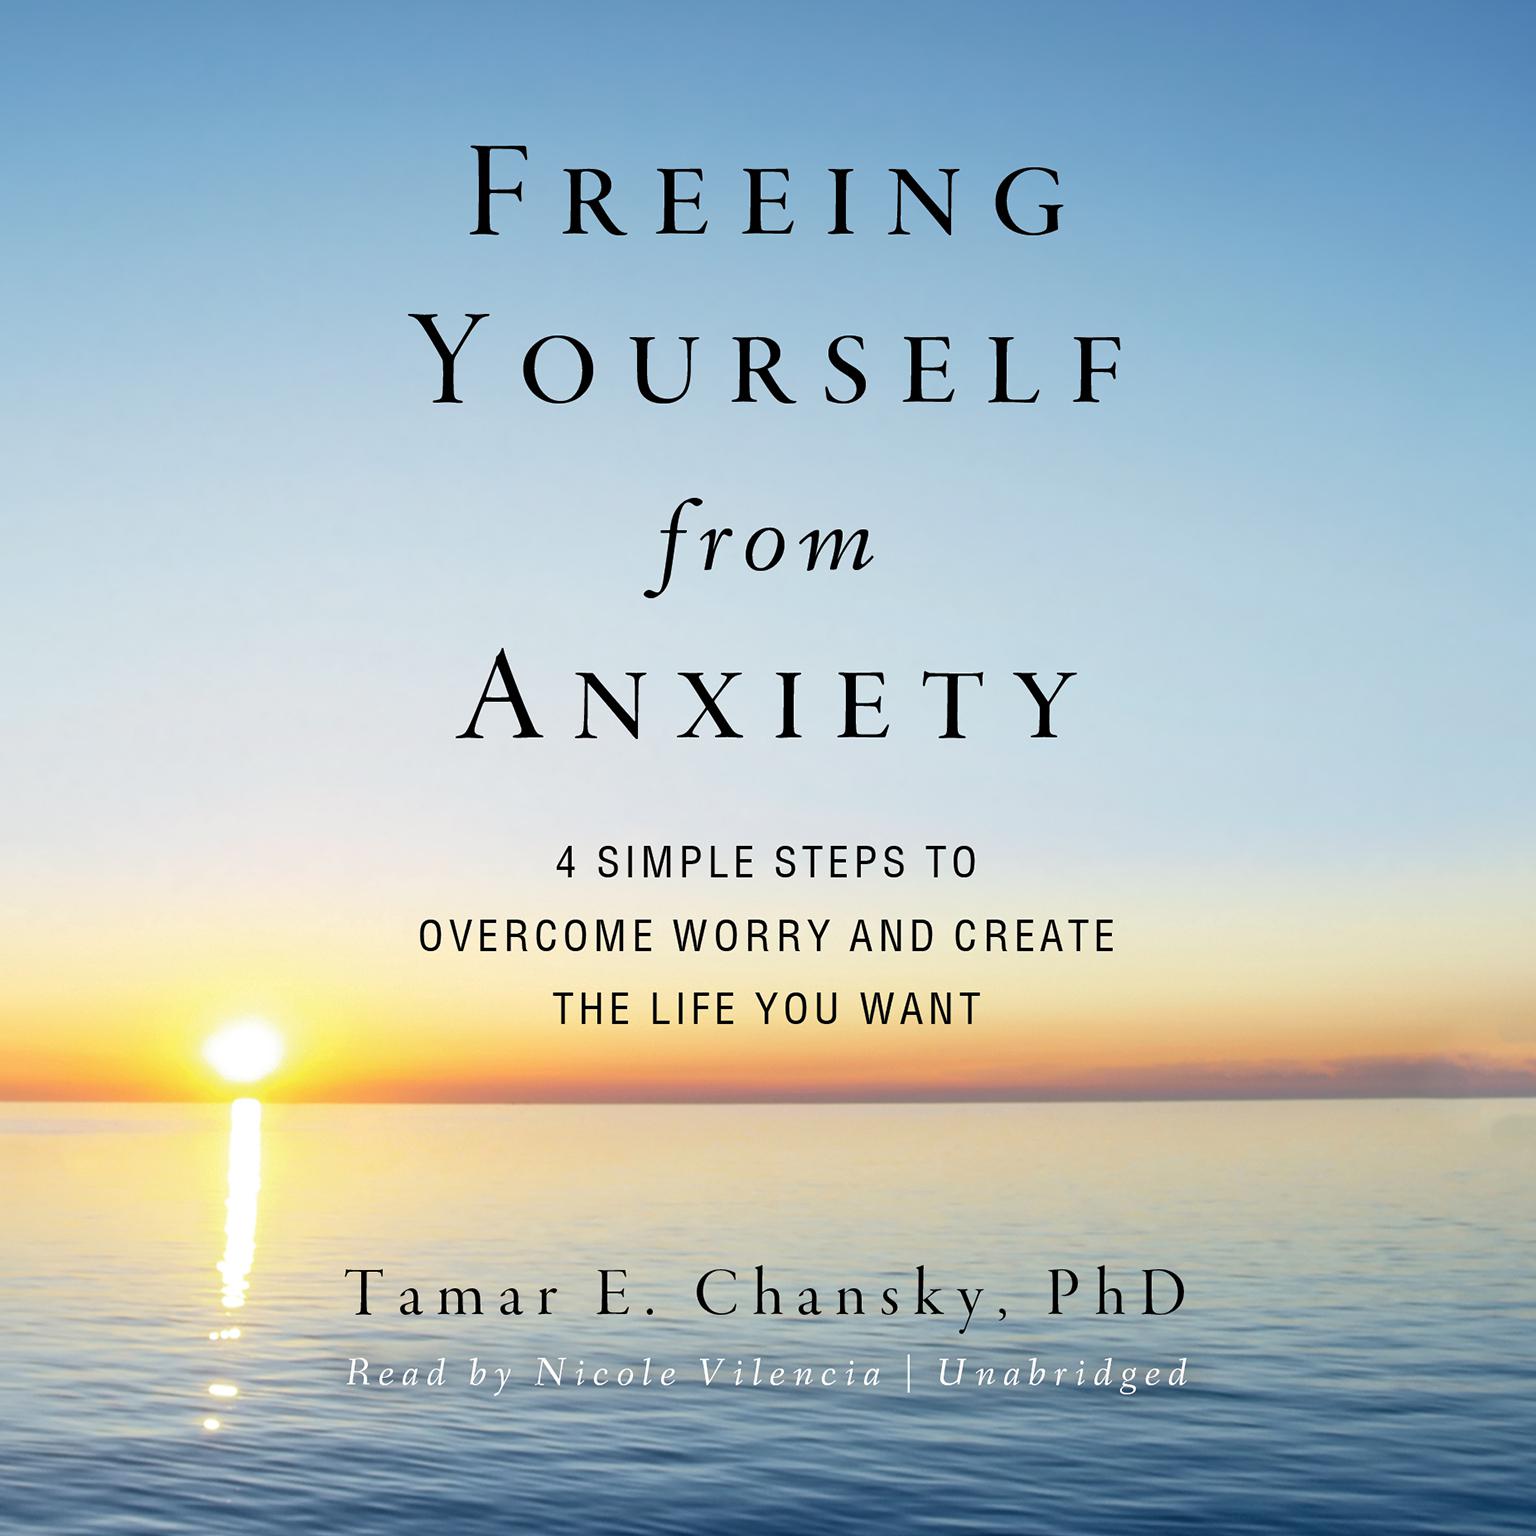 Freeing Yourself from Anxiety: Four Simple Steps to Overcome Worry and Create the Life You Want Audiobook, by Tamar E. Chansky